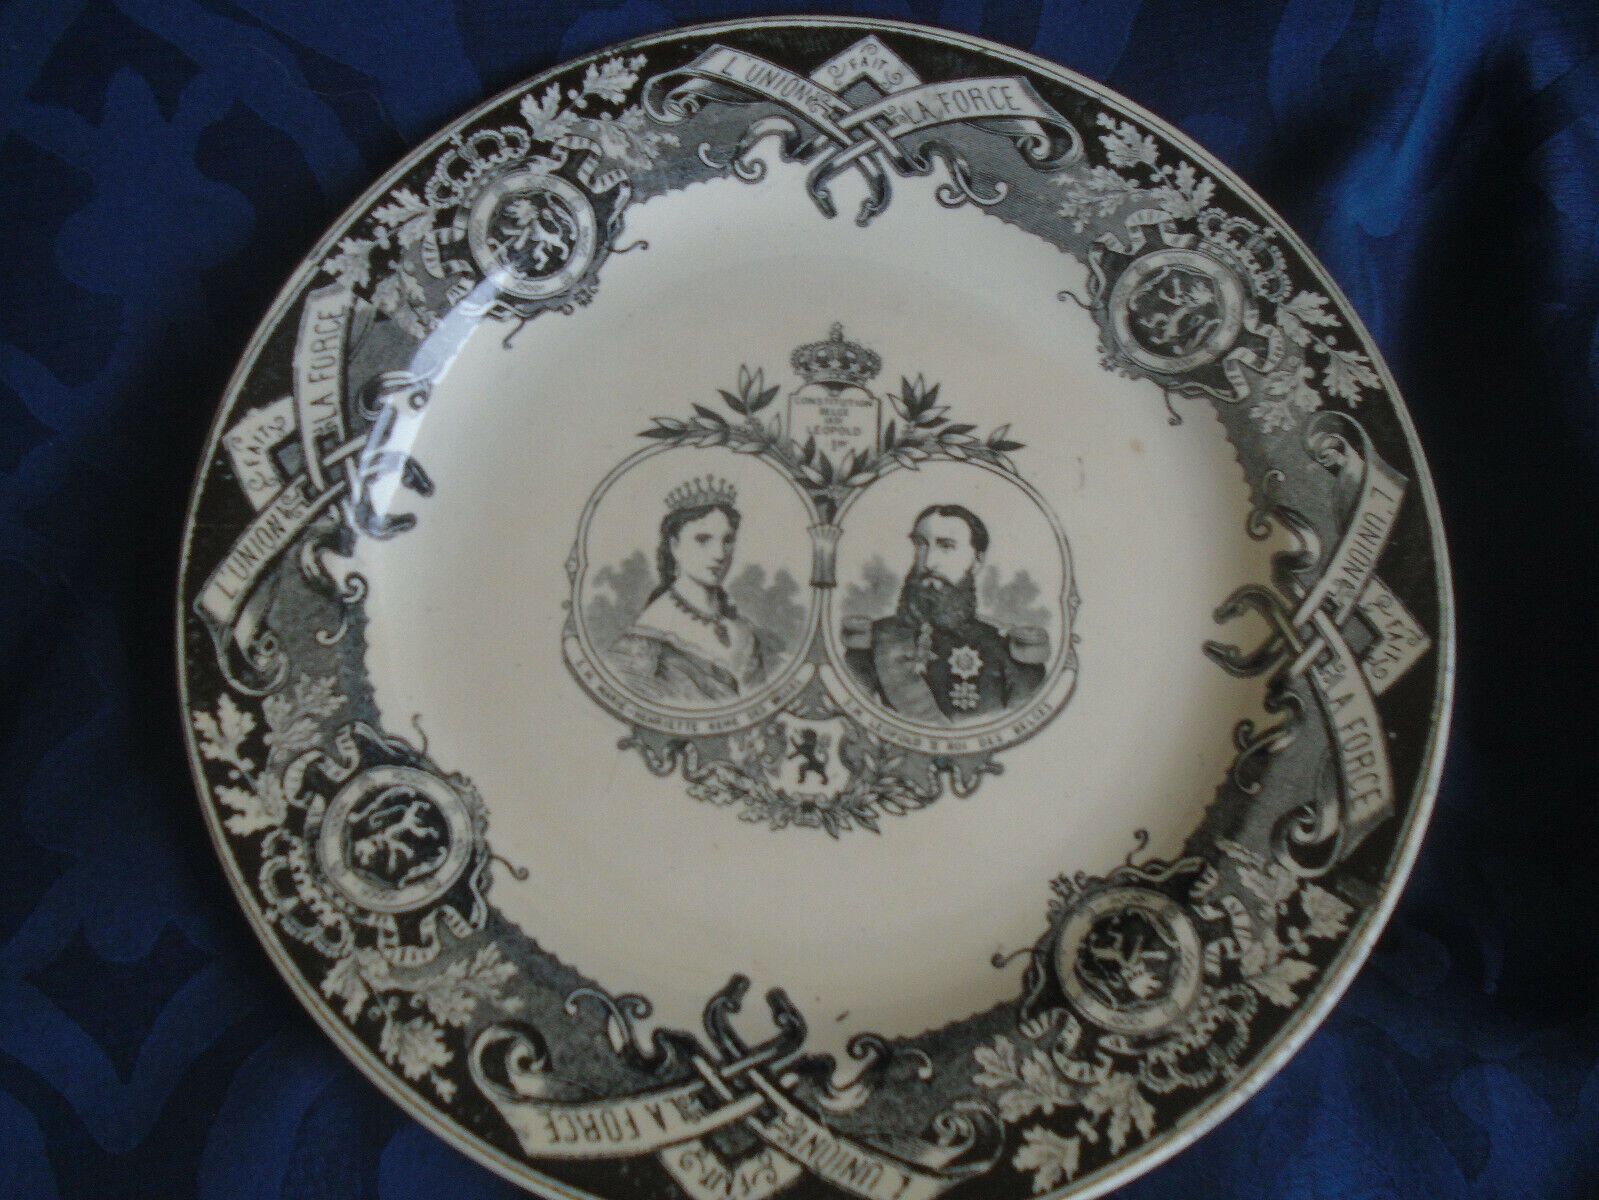 Plate commemorating the reign of King Leopold II of Belgium (1835-1909)